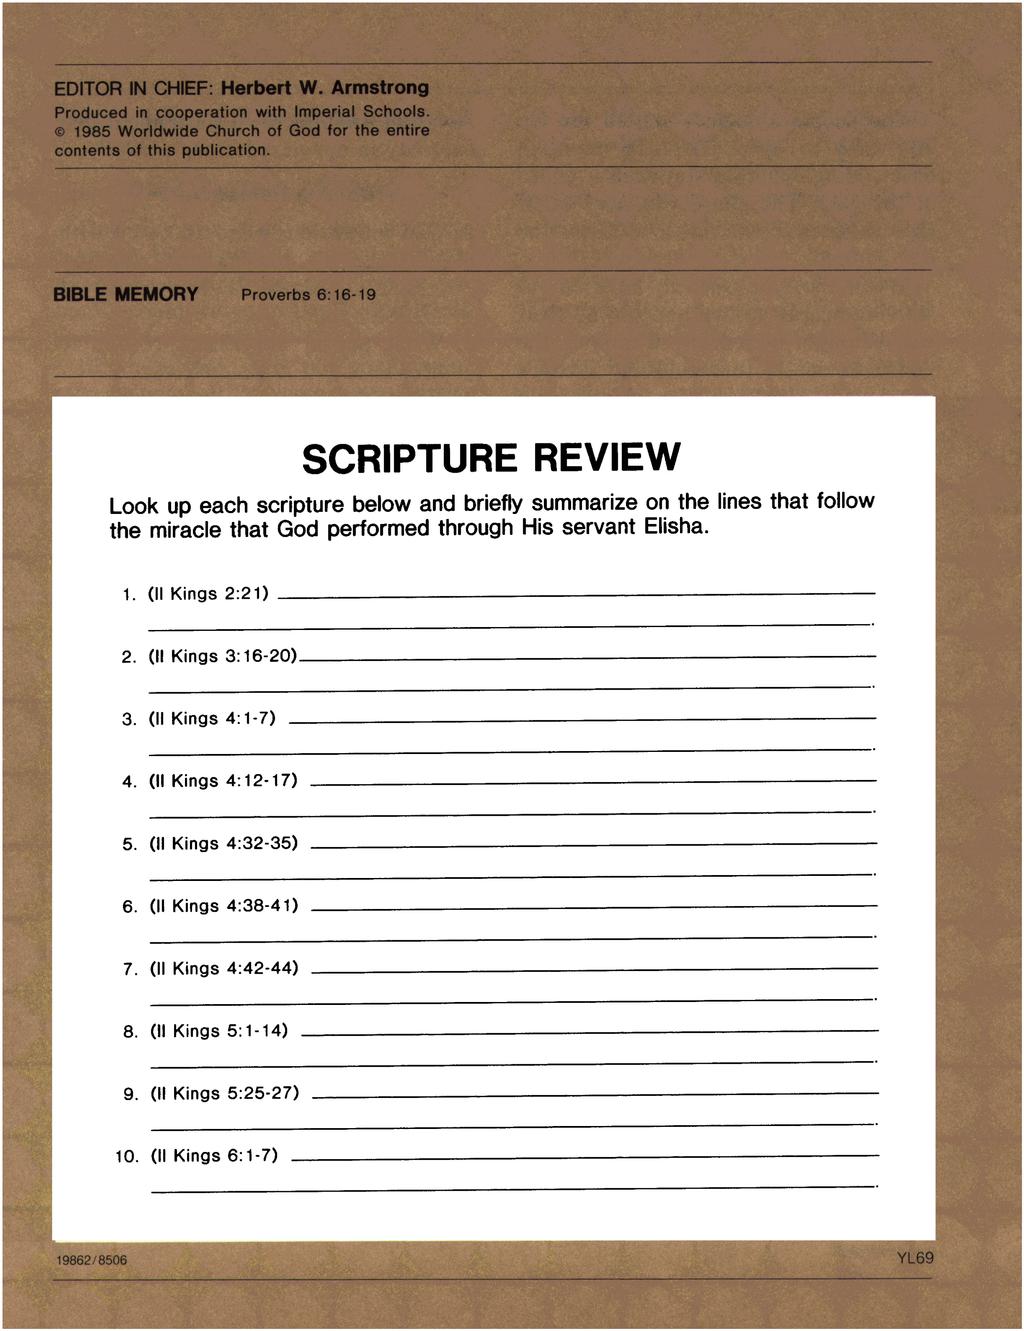 SCRIPTURE REVIEW Look up each scripture below and briefly summarize on the lines that follow the miracle that God performed through His servant Elisha. 1. (II Kings 2:21) 2.